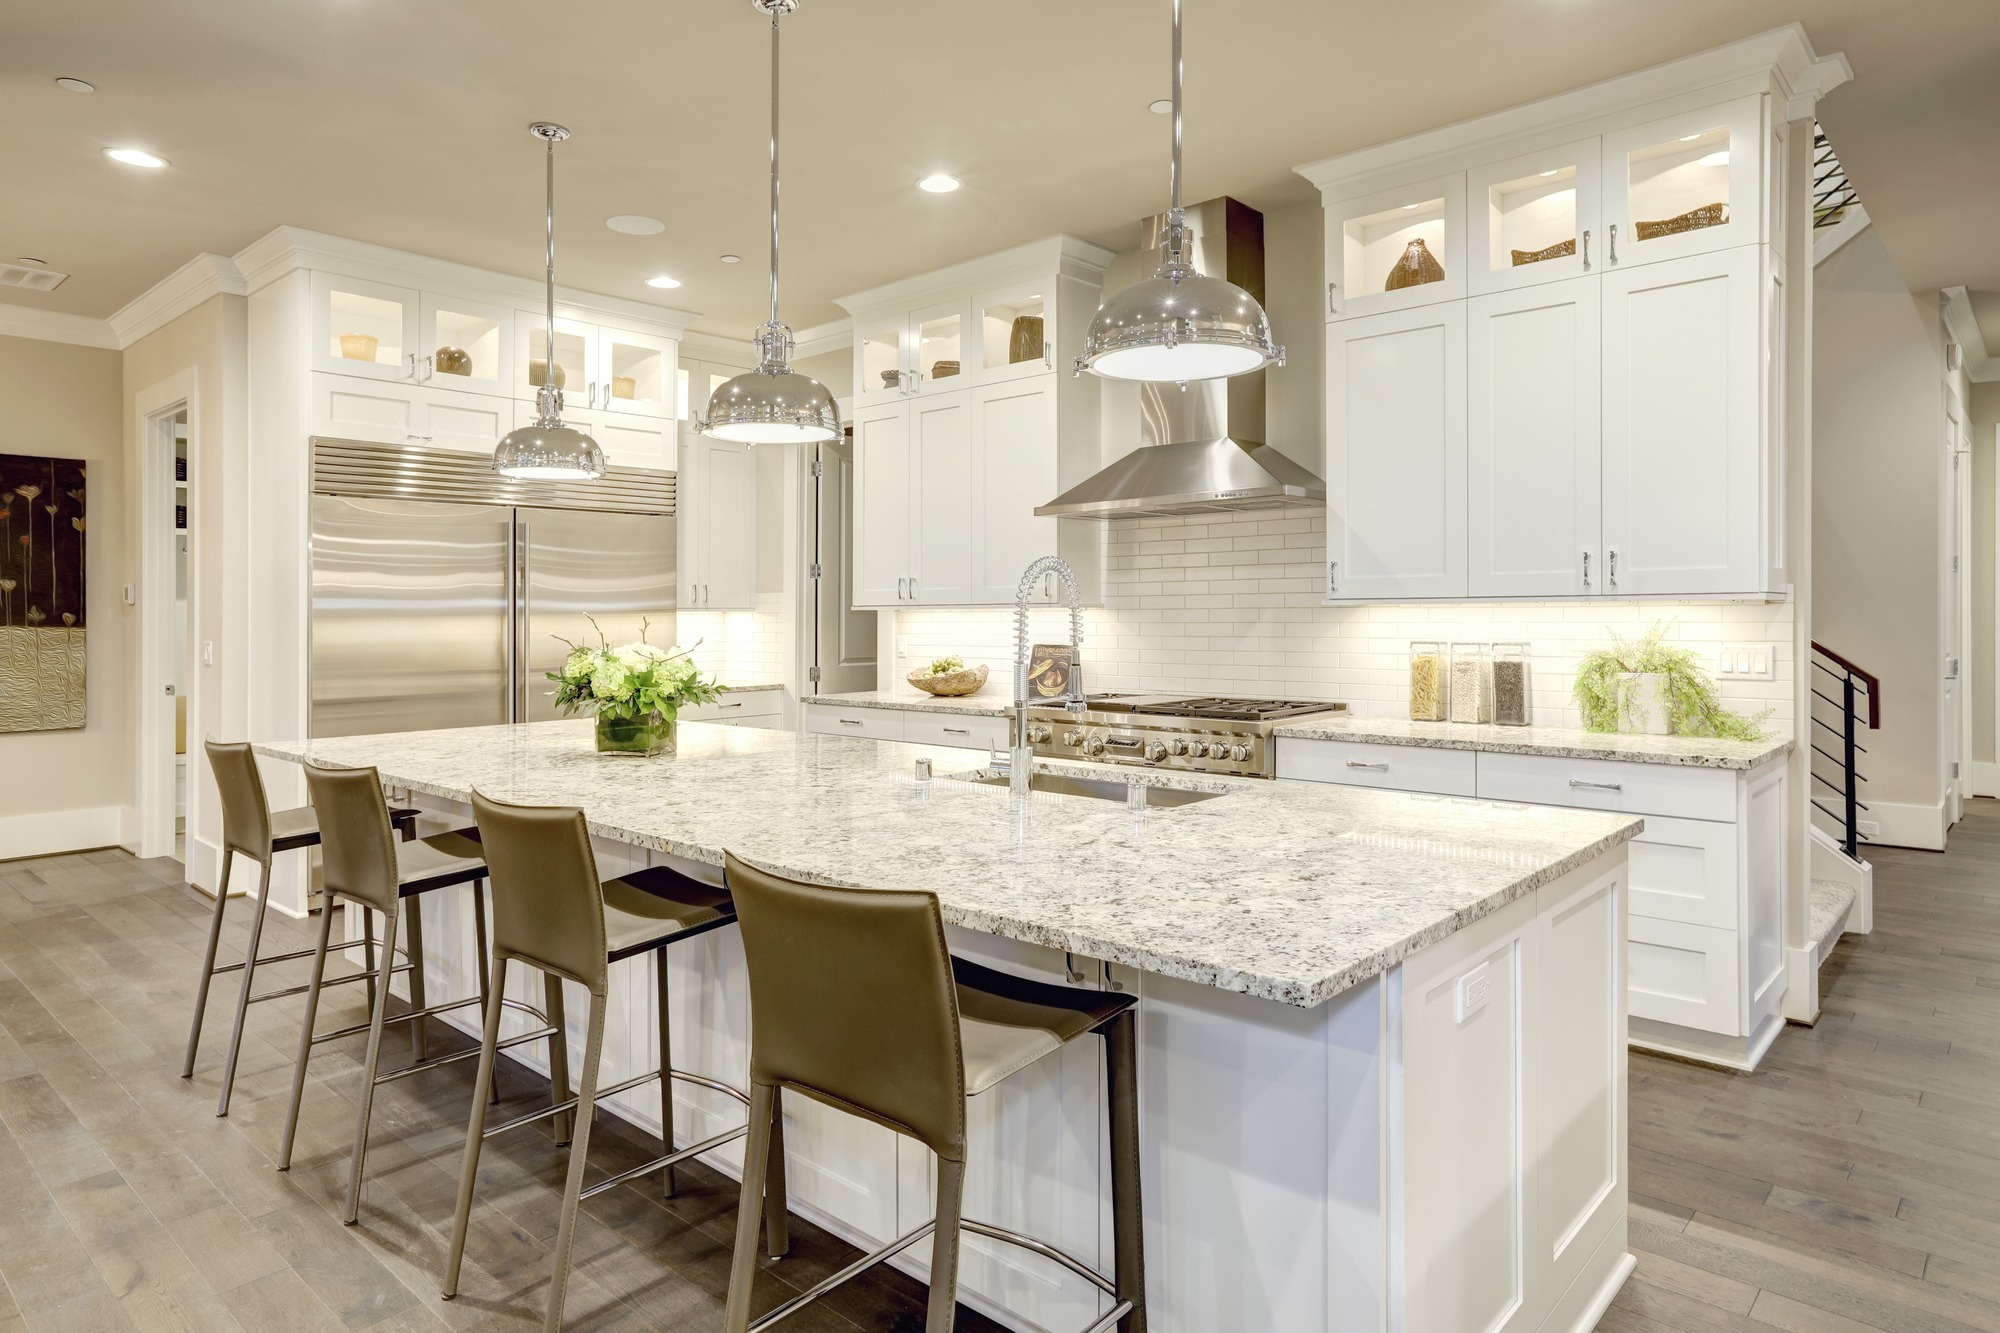 White kitchen design in new luxurious home with white shaker style cabinets